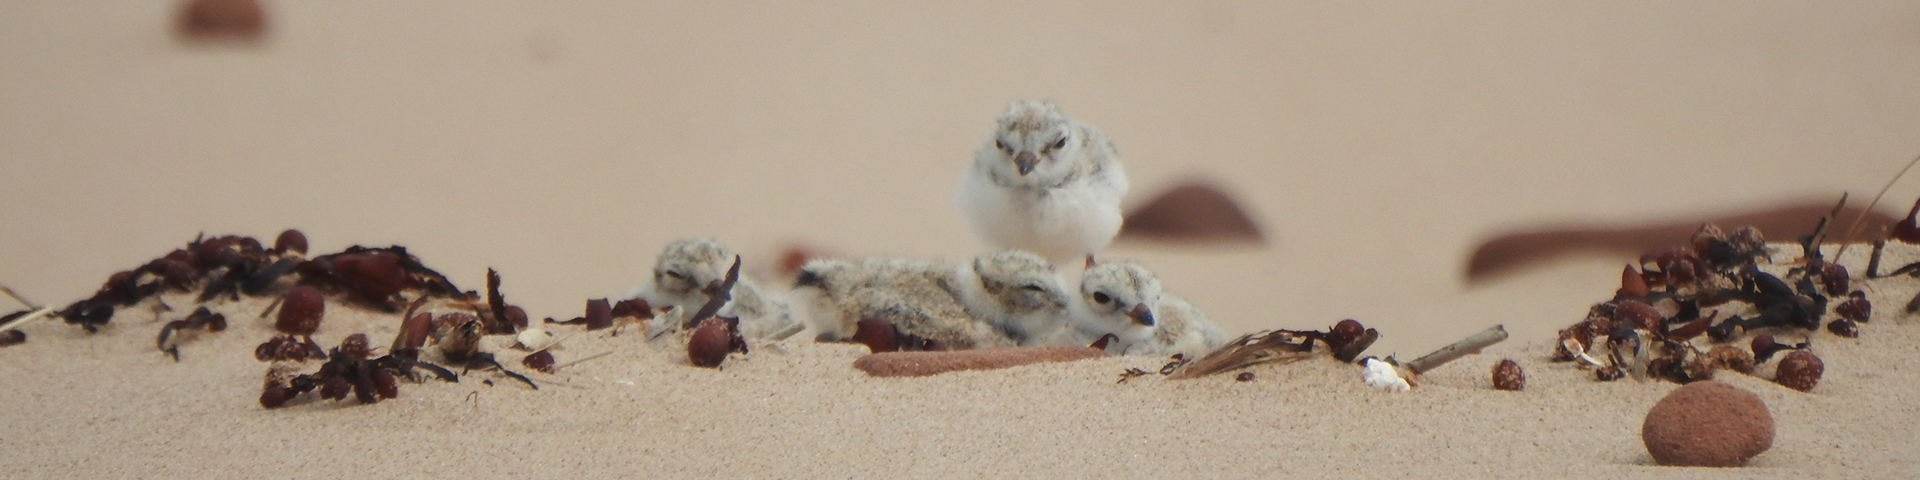 A Piping Plover on the beach with her chicks